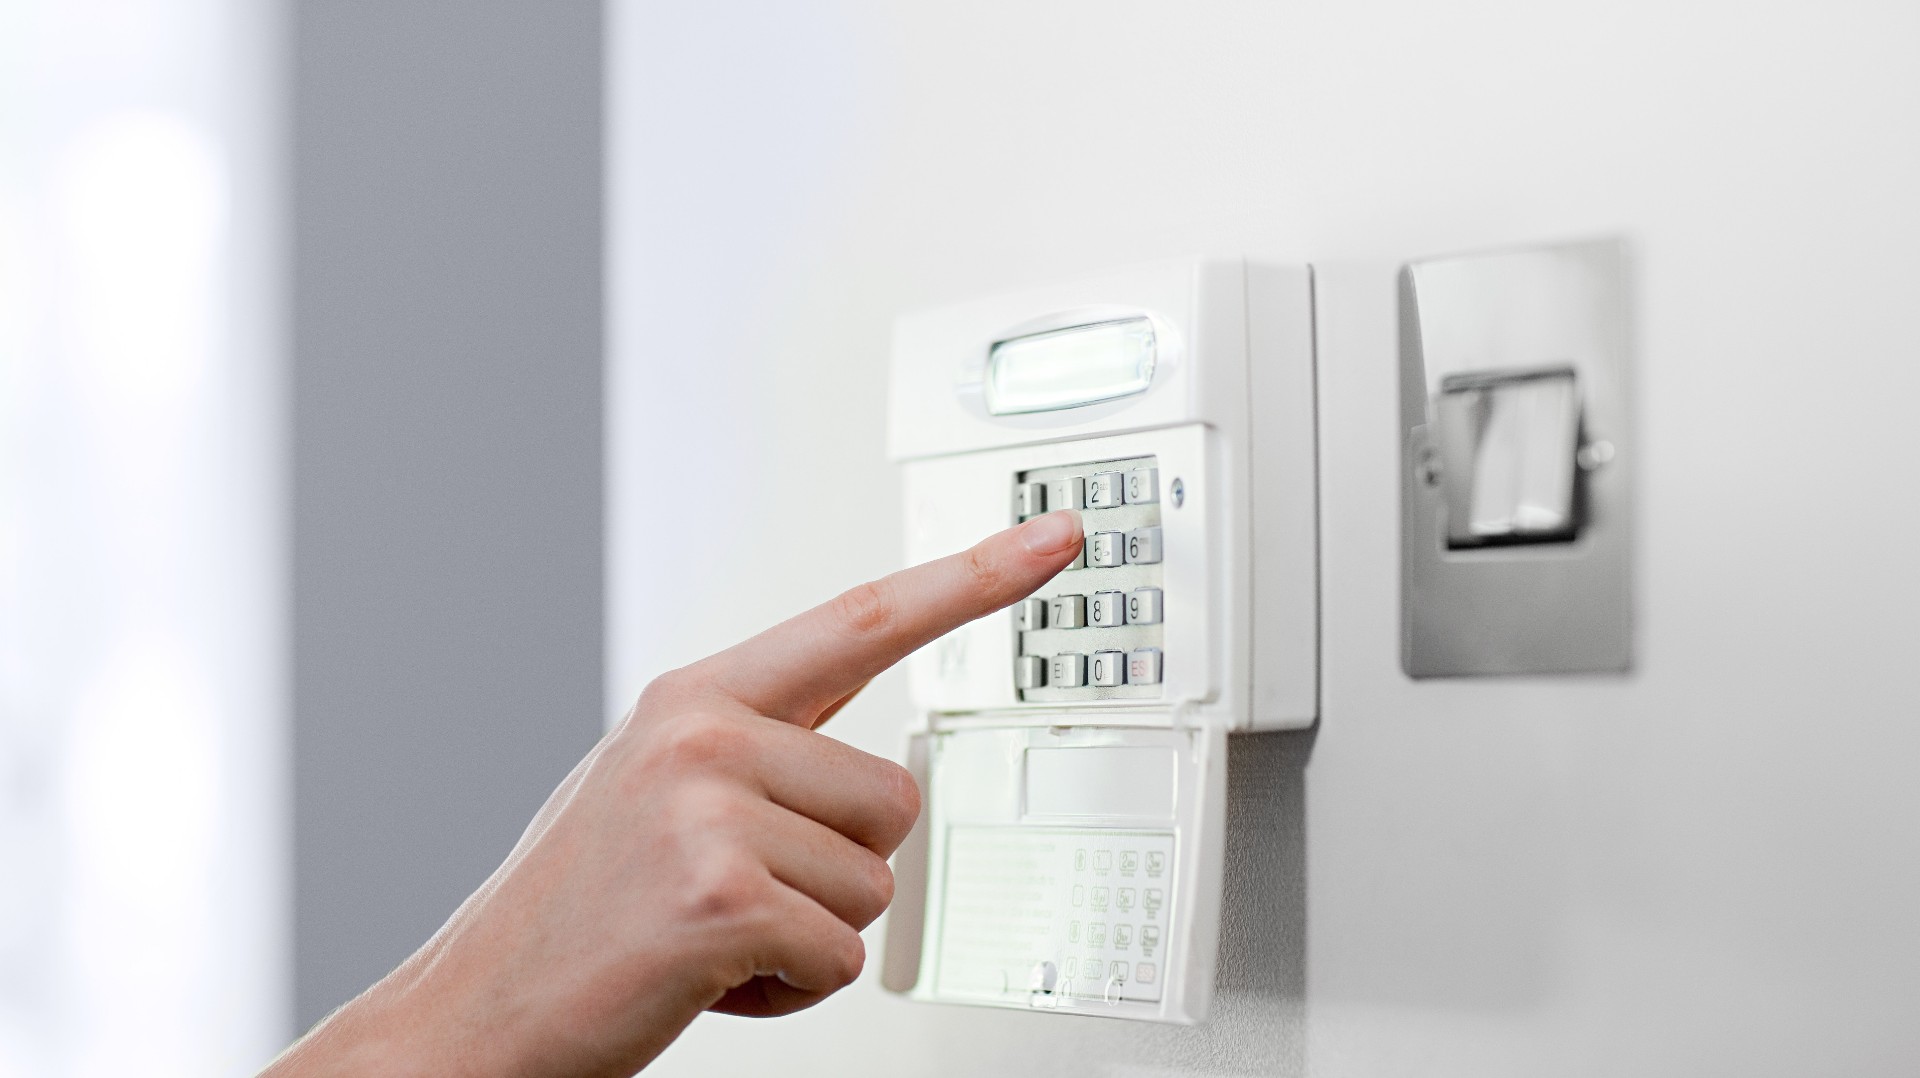 The Importance Of Lifesaving Duress Alarm Systems